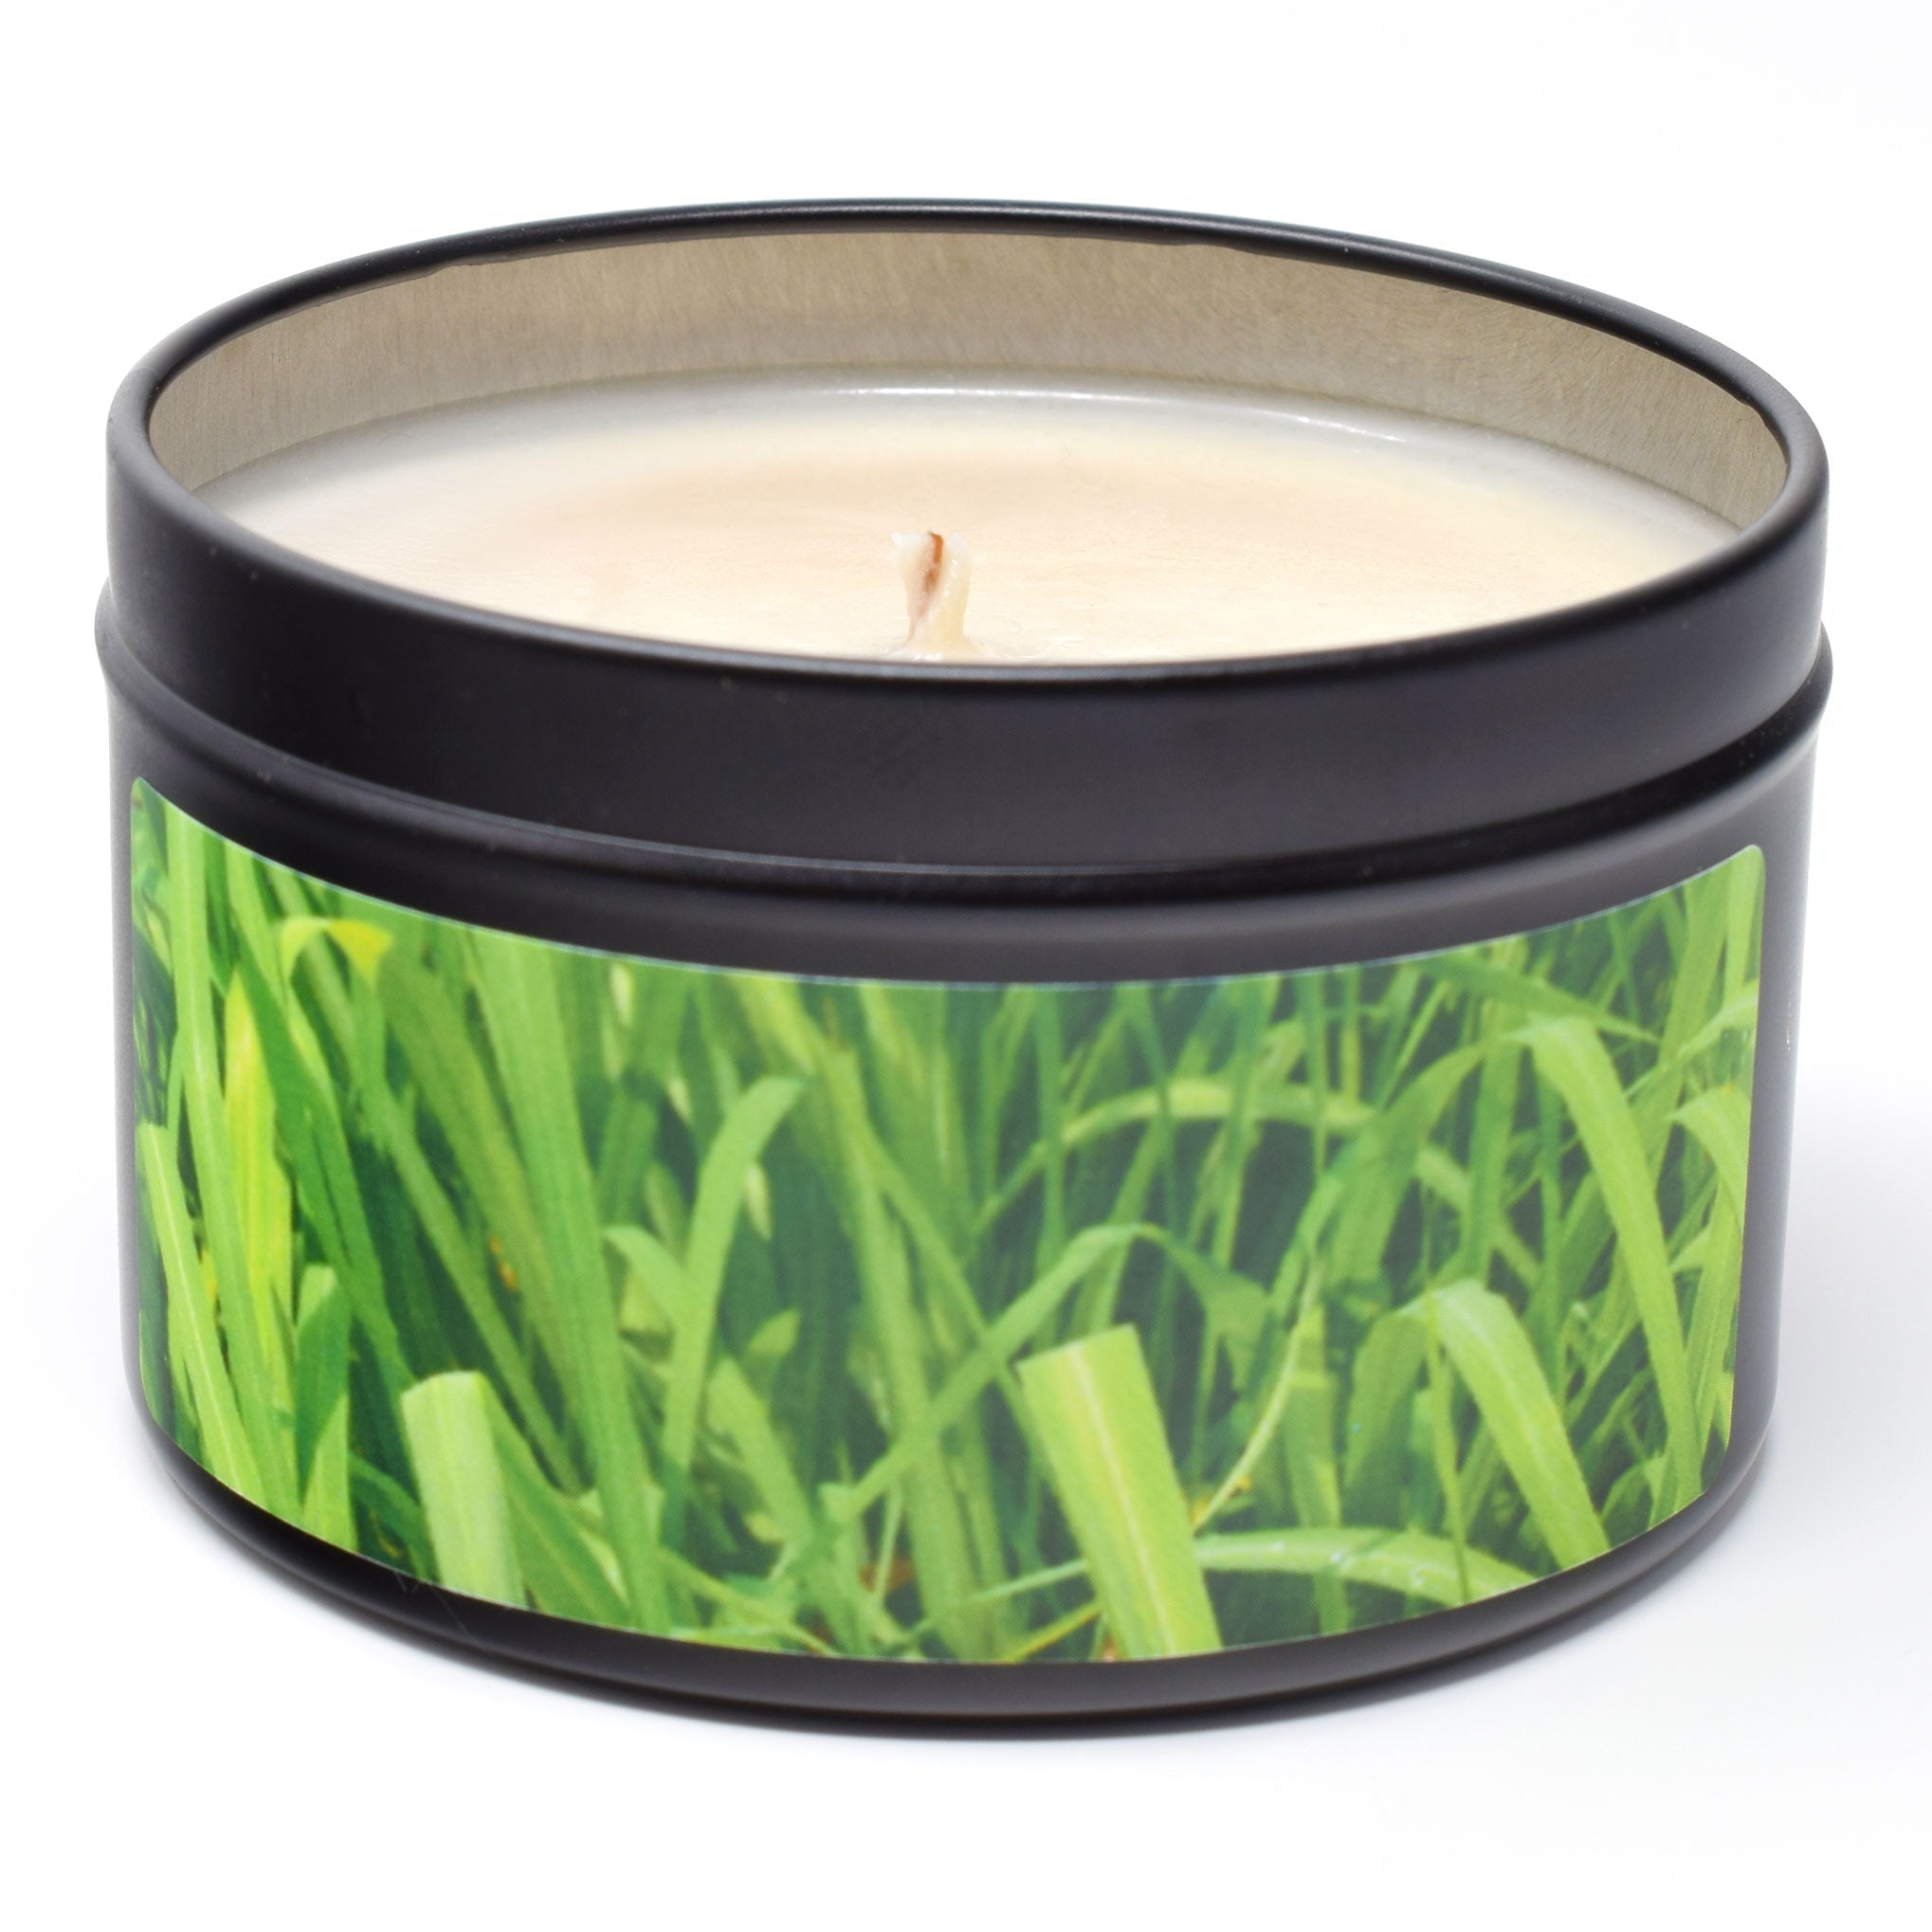 Buzz Off Essential Oil Blend, 6oz Soy Candle Tin - Candeo Candle